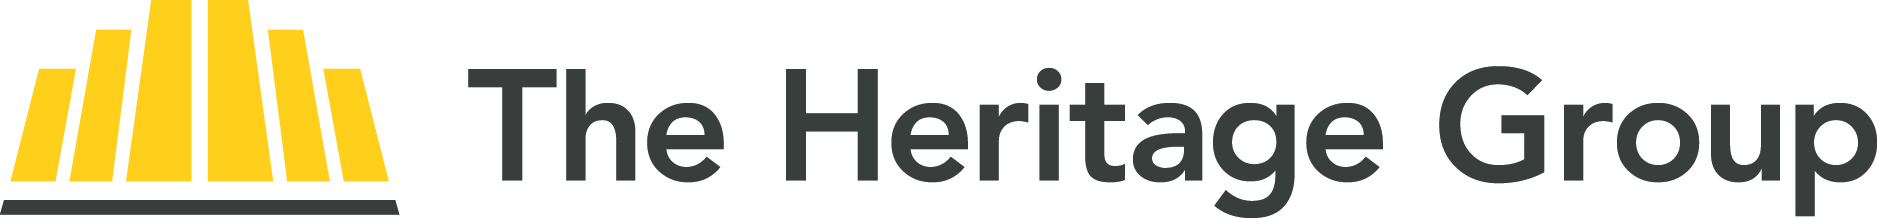 Sponsor - The Heritage Group